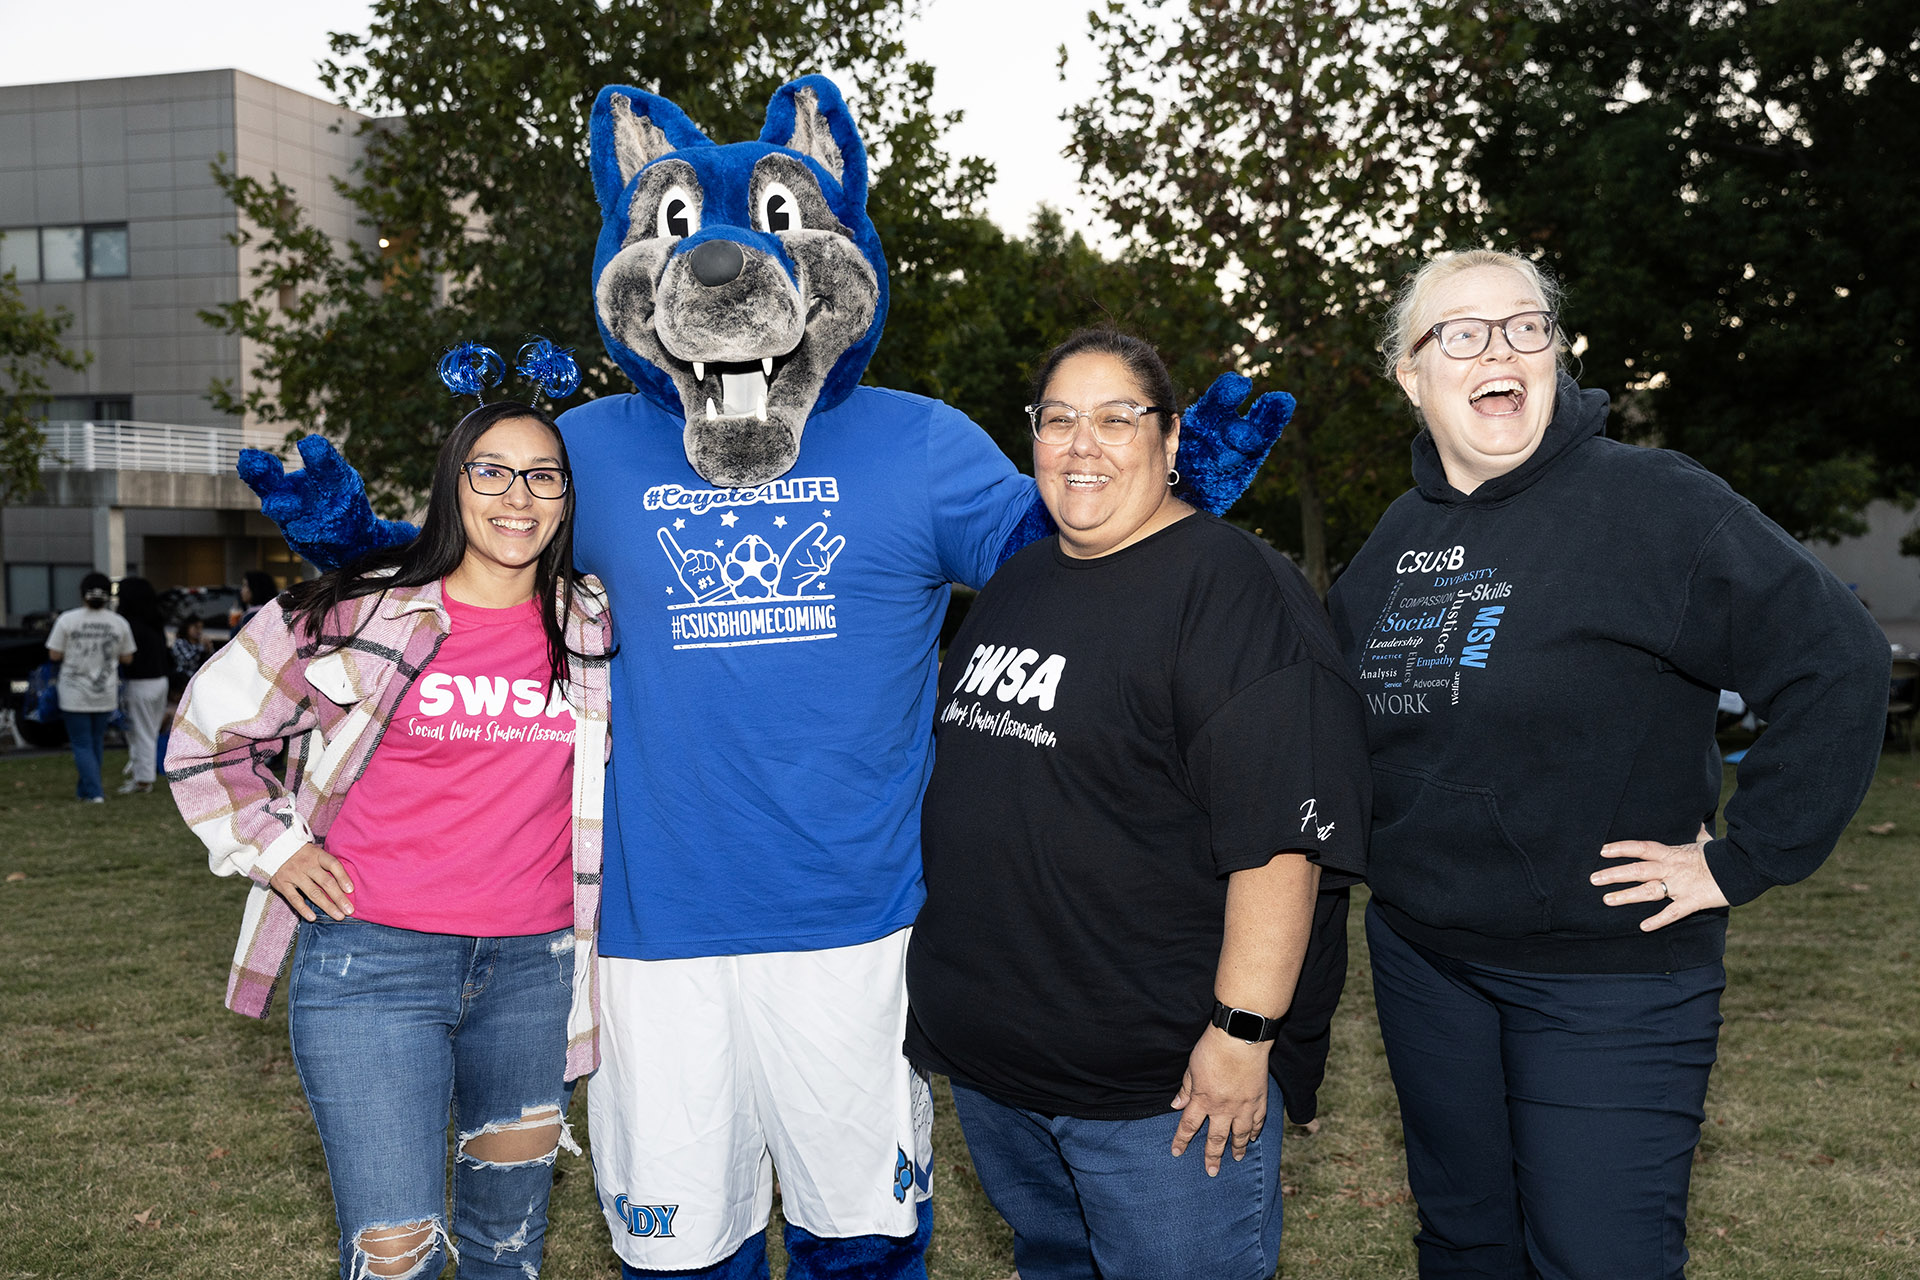 Cody the Coyote poses with Homecoming Bash guests